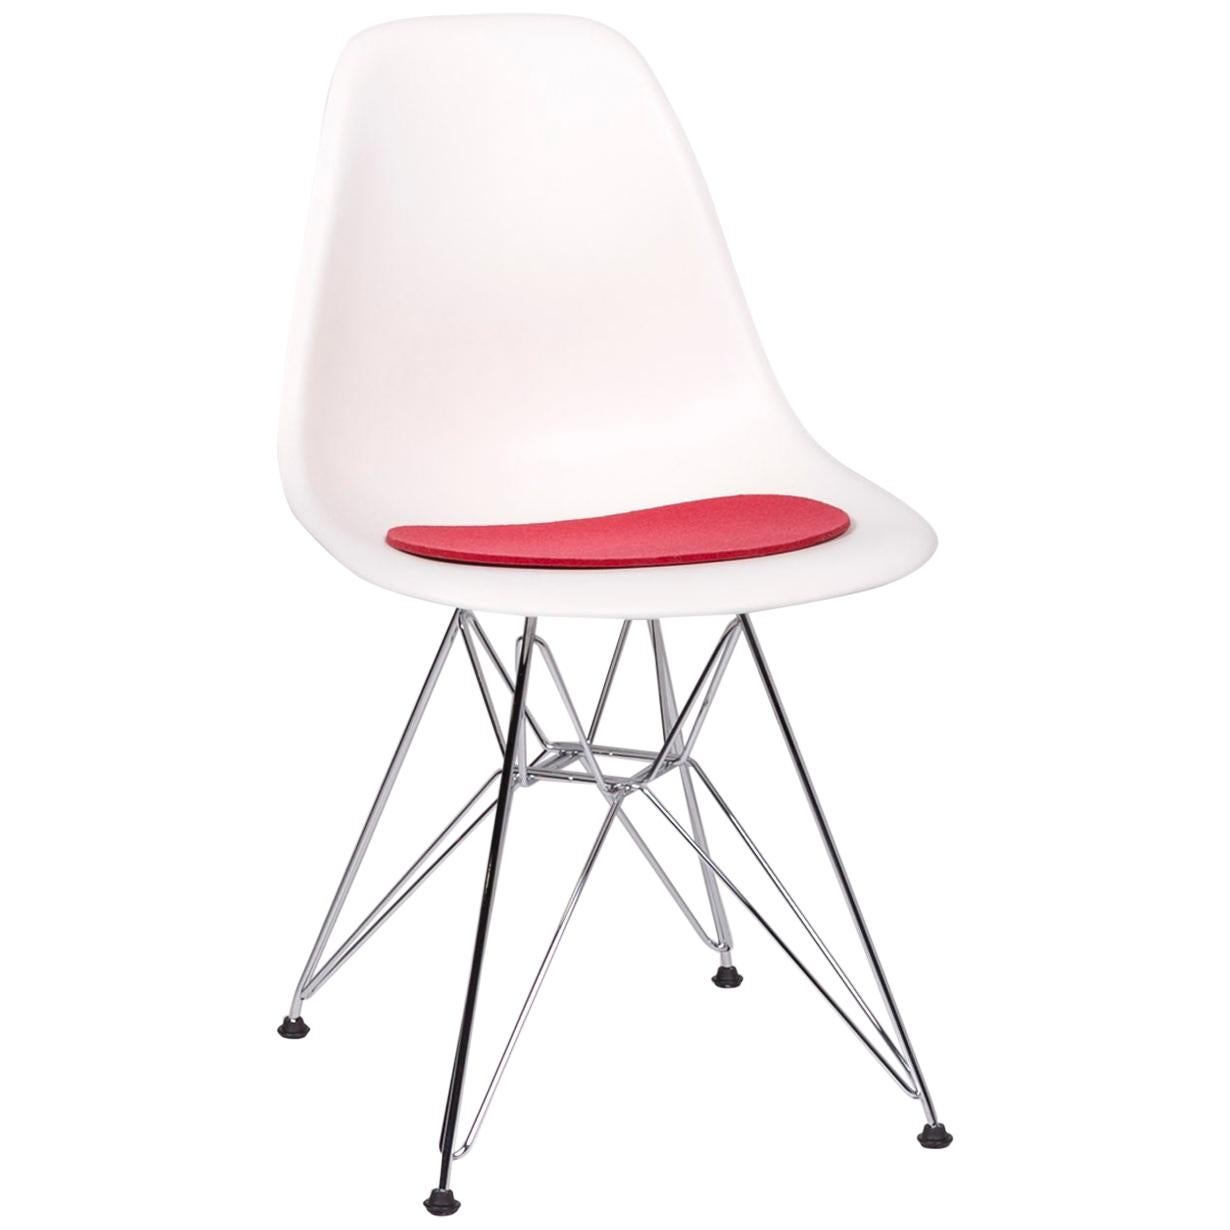 Vitra Eames Plastic Side Chair DSR White Plastic Chair White incl. Upholstery